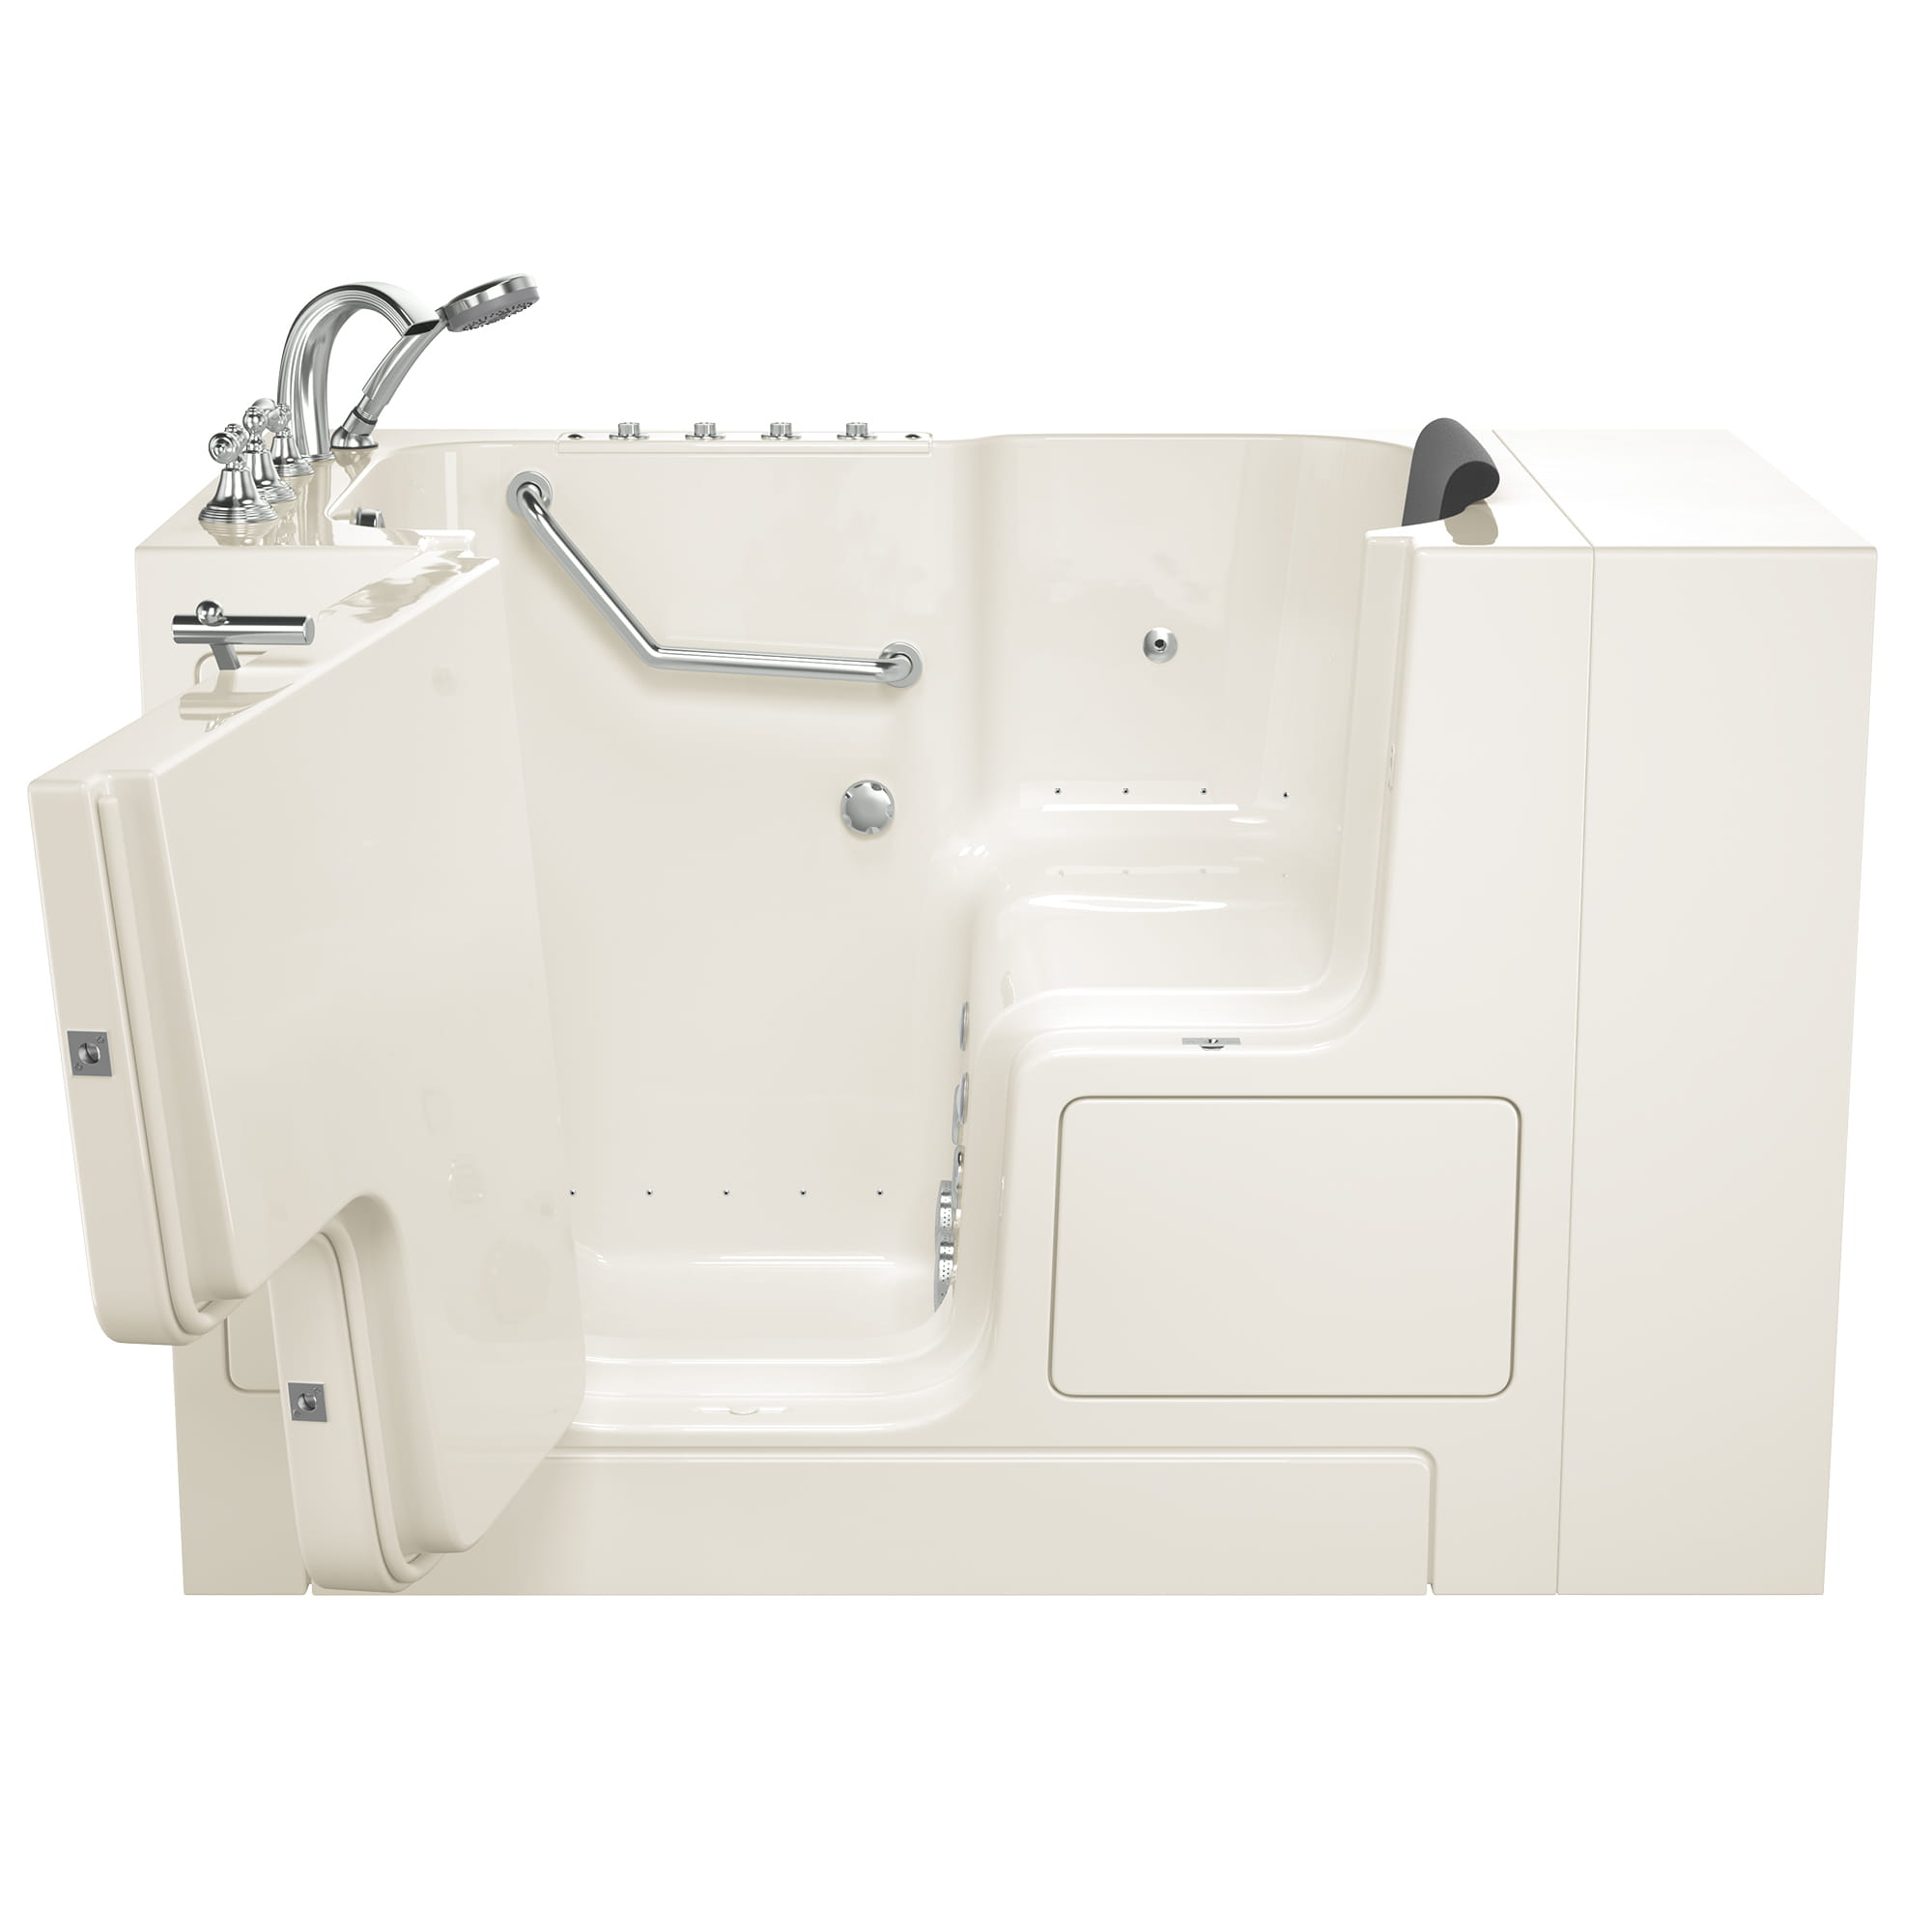 Gelcoat Premium Series 32 x 52 -Inch Walk-in Tub With Combination Air Spa and Whirlpool Systems - Left-Hand Drain With Faucet